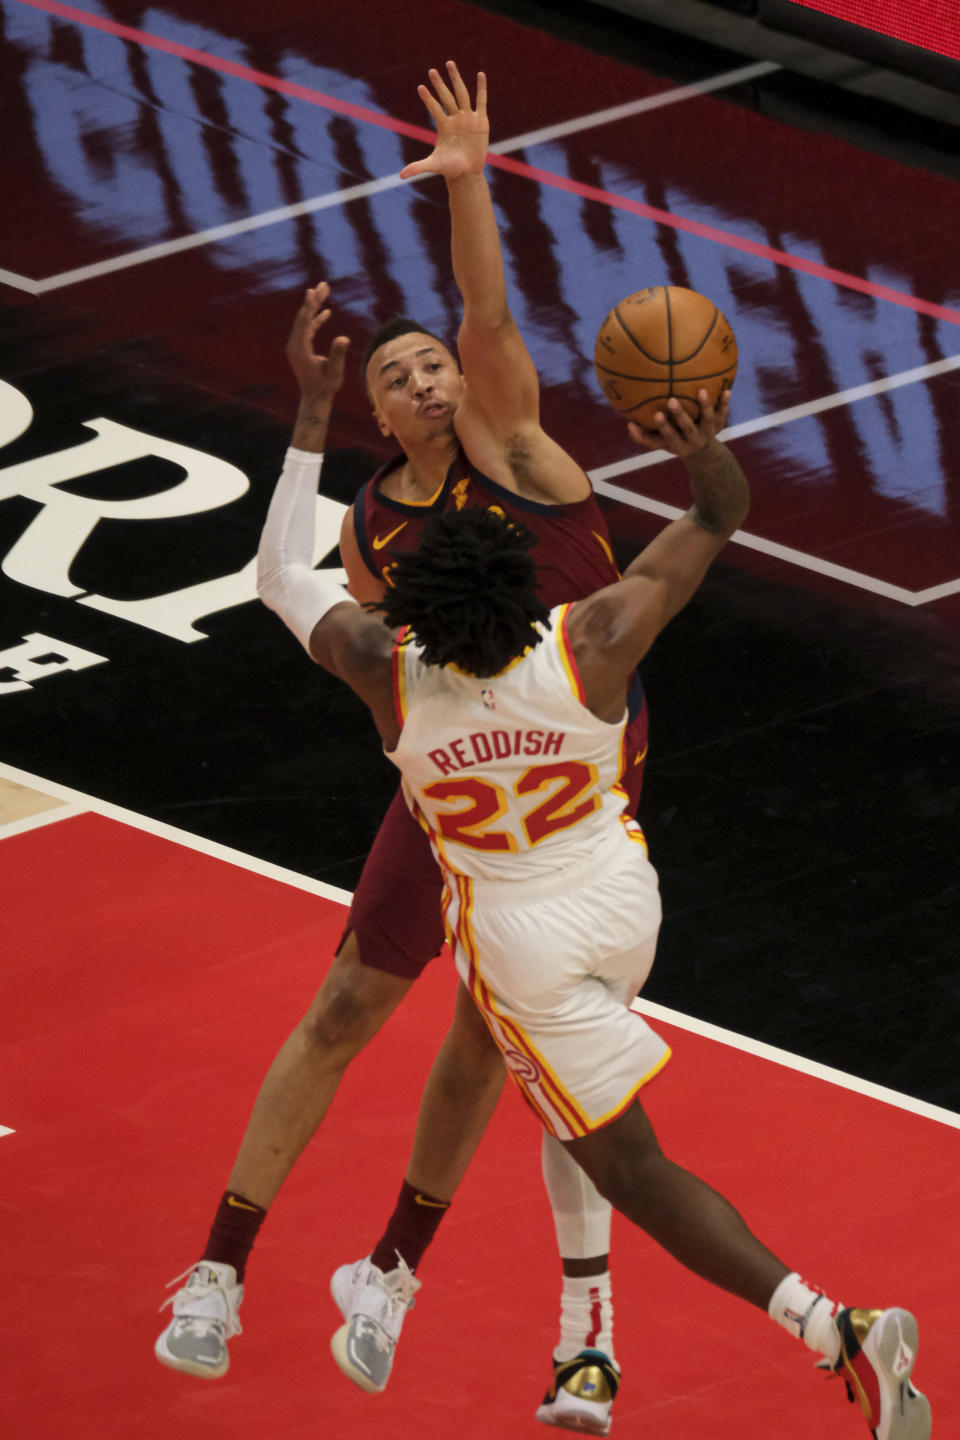 Atlanta Hawks forward Cam Reddish (22) tries for a shot and is blocked by Cleveland Cavaliers guard Dante Exum (1) during the second half of an NBA basketball game on Saturday, Jan. 2, 2021 in Atlanta. (AP Photo/Ben Gray)